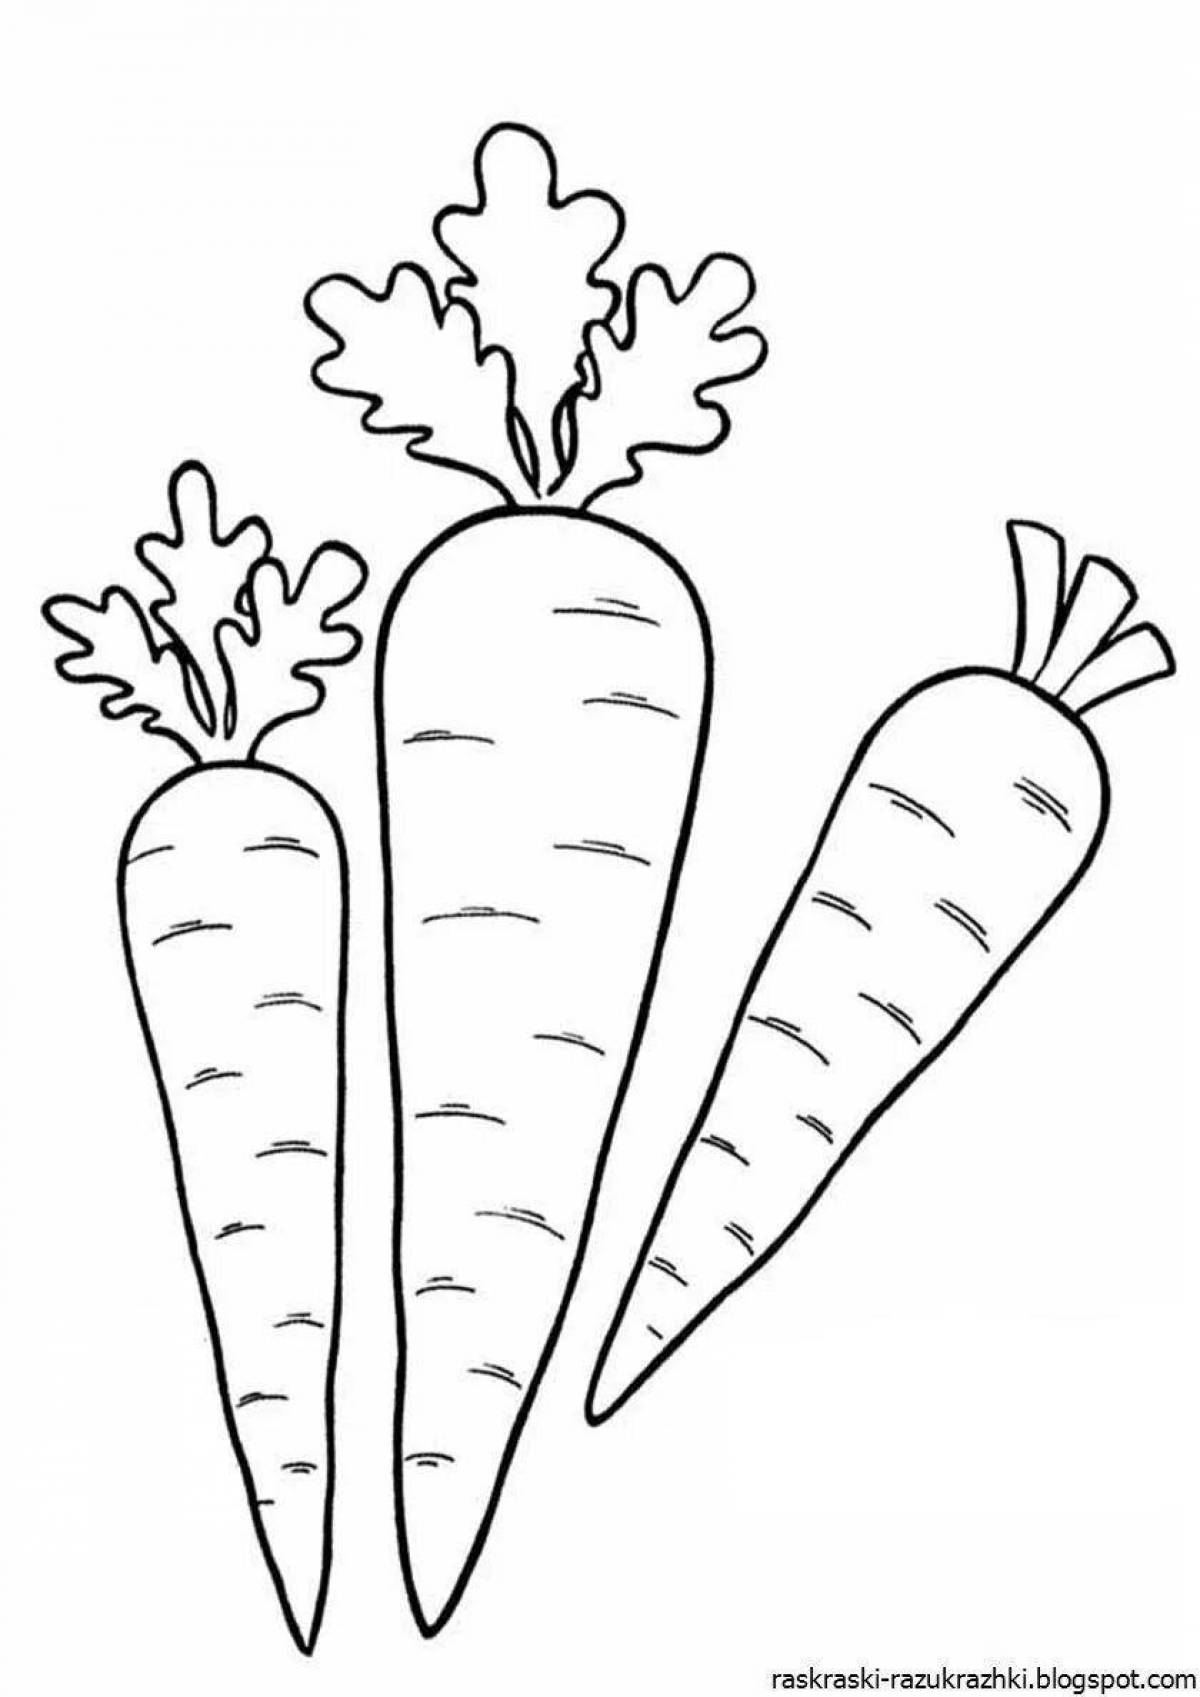 Attractive carrot coloring book for 3-4 year olds